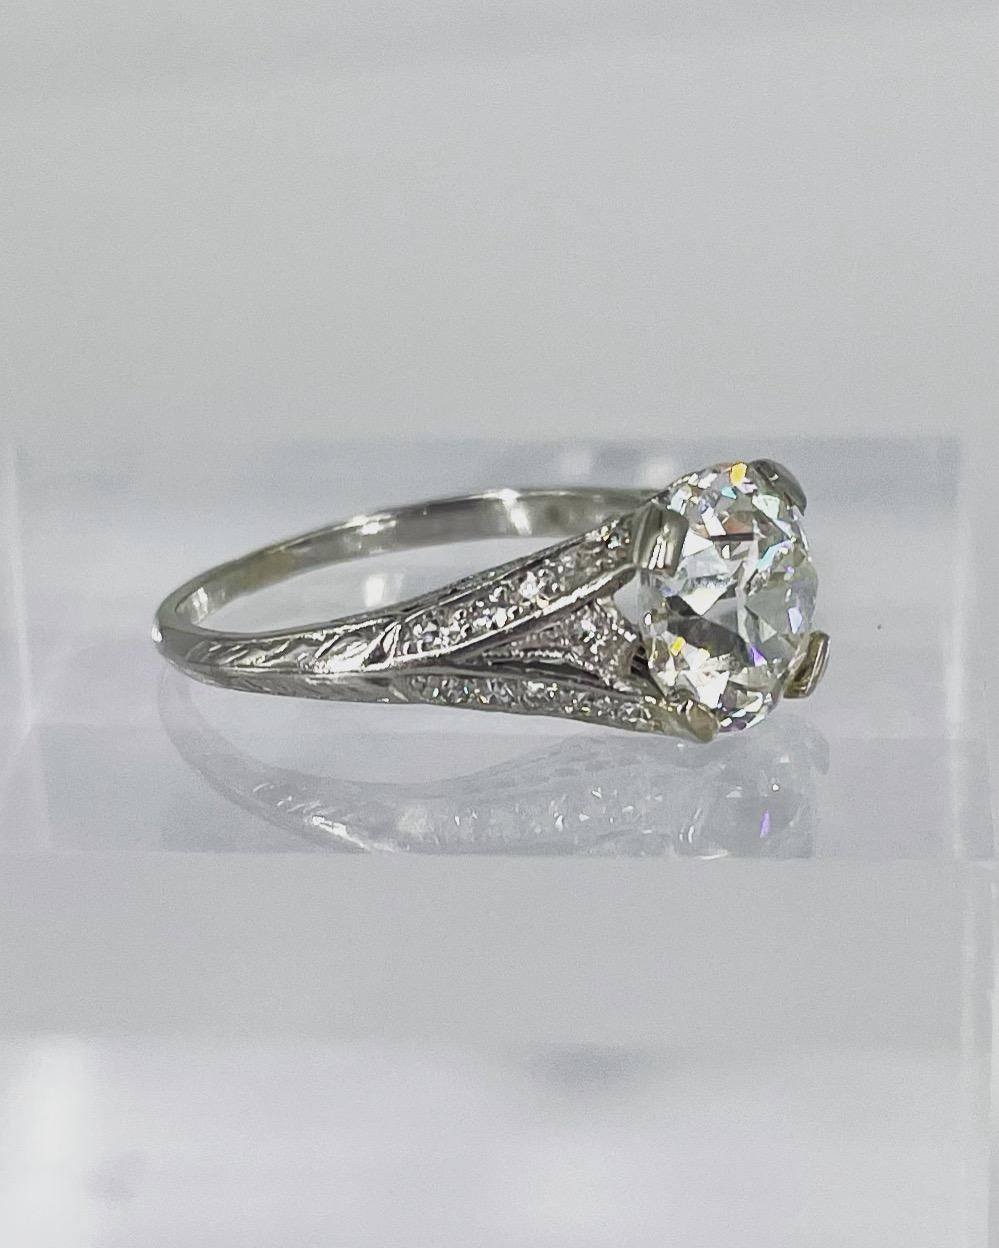 This exquisitely detailed Art Deco engagement ring is a beautiful example of the intricate craftsmanship of the period. Featuring a 2.58 carat European cut diamond, it is very special to have an antique piece with the original diamond. The diamond